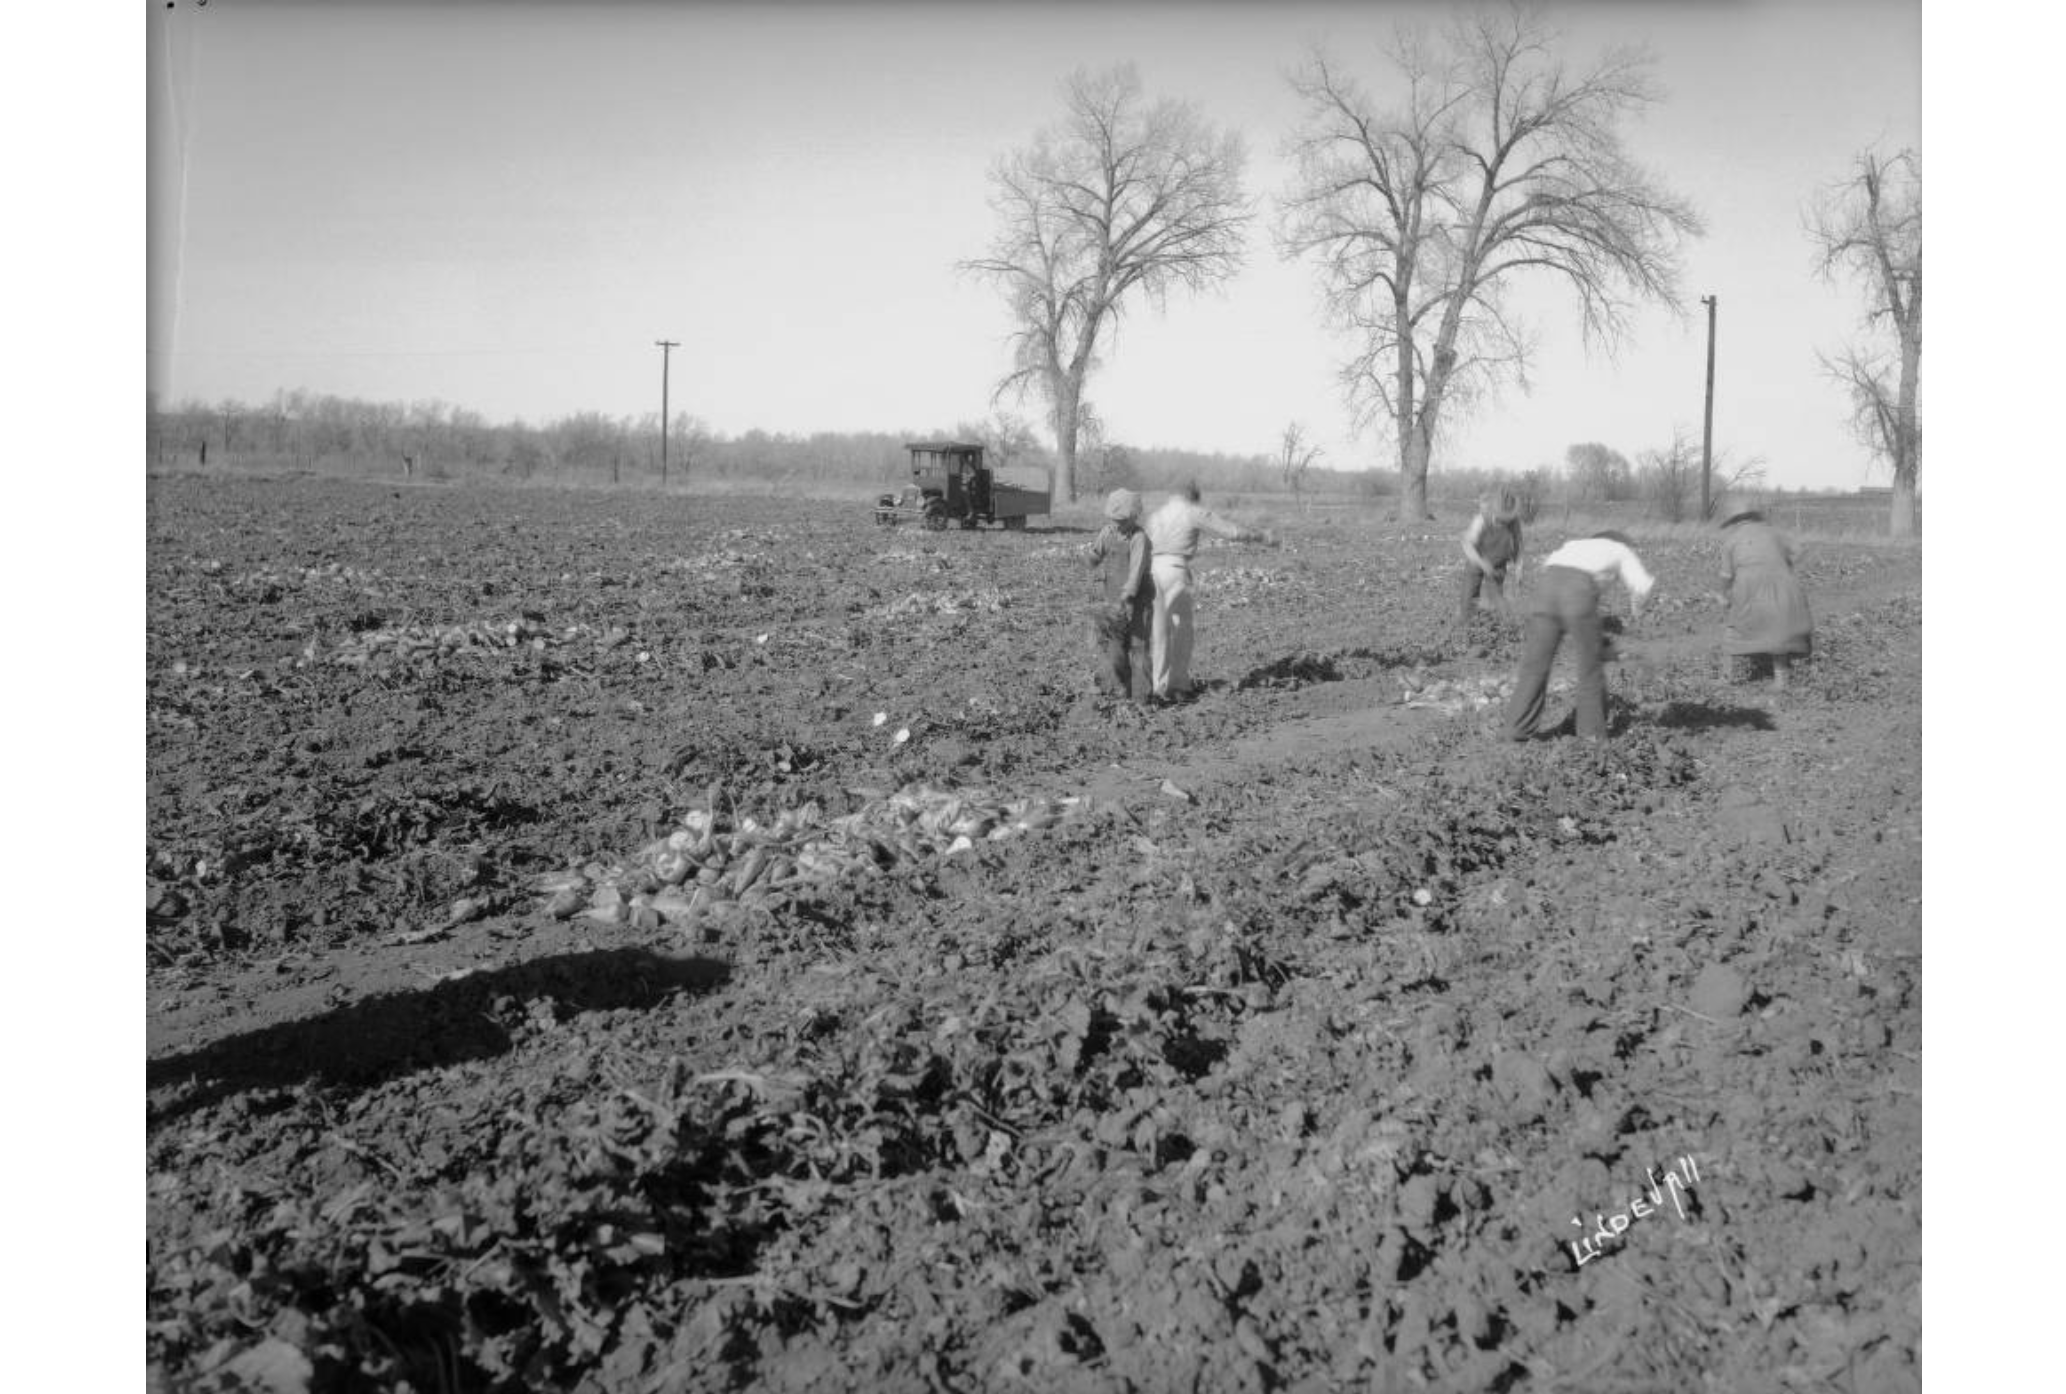 Photo of a sugar beet farm. Five workers, men and women, can be seen tending to the soil. A Model A farm truck is parked in the distance, near a few very tall trees. The workers are all wearing hats and bending over the soil, which has been plowed in anticipation of crops.